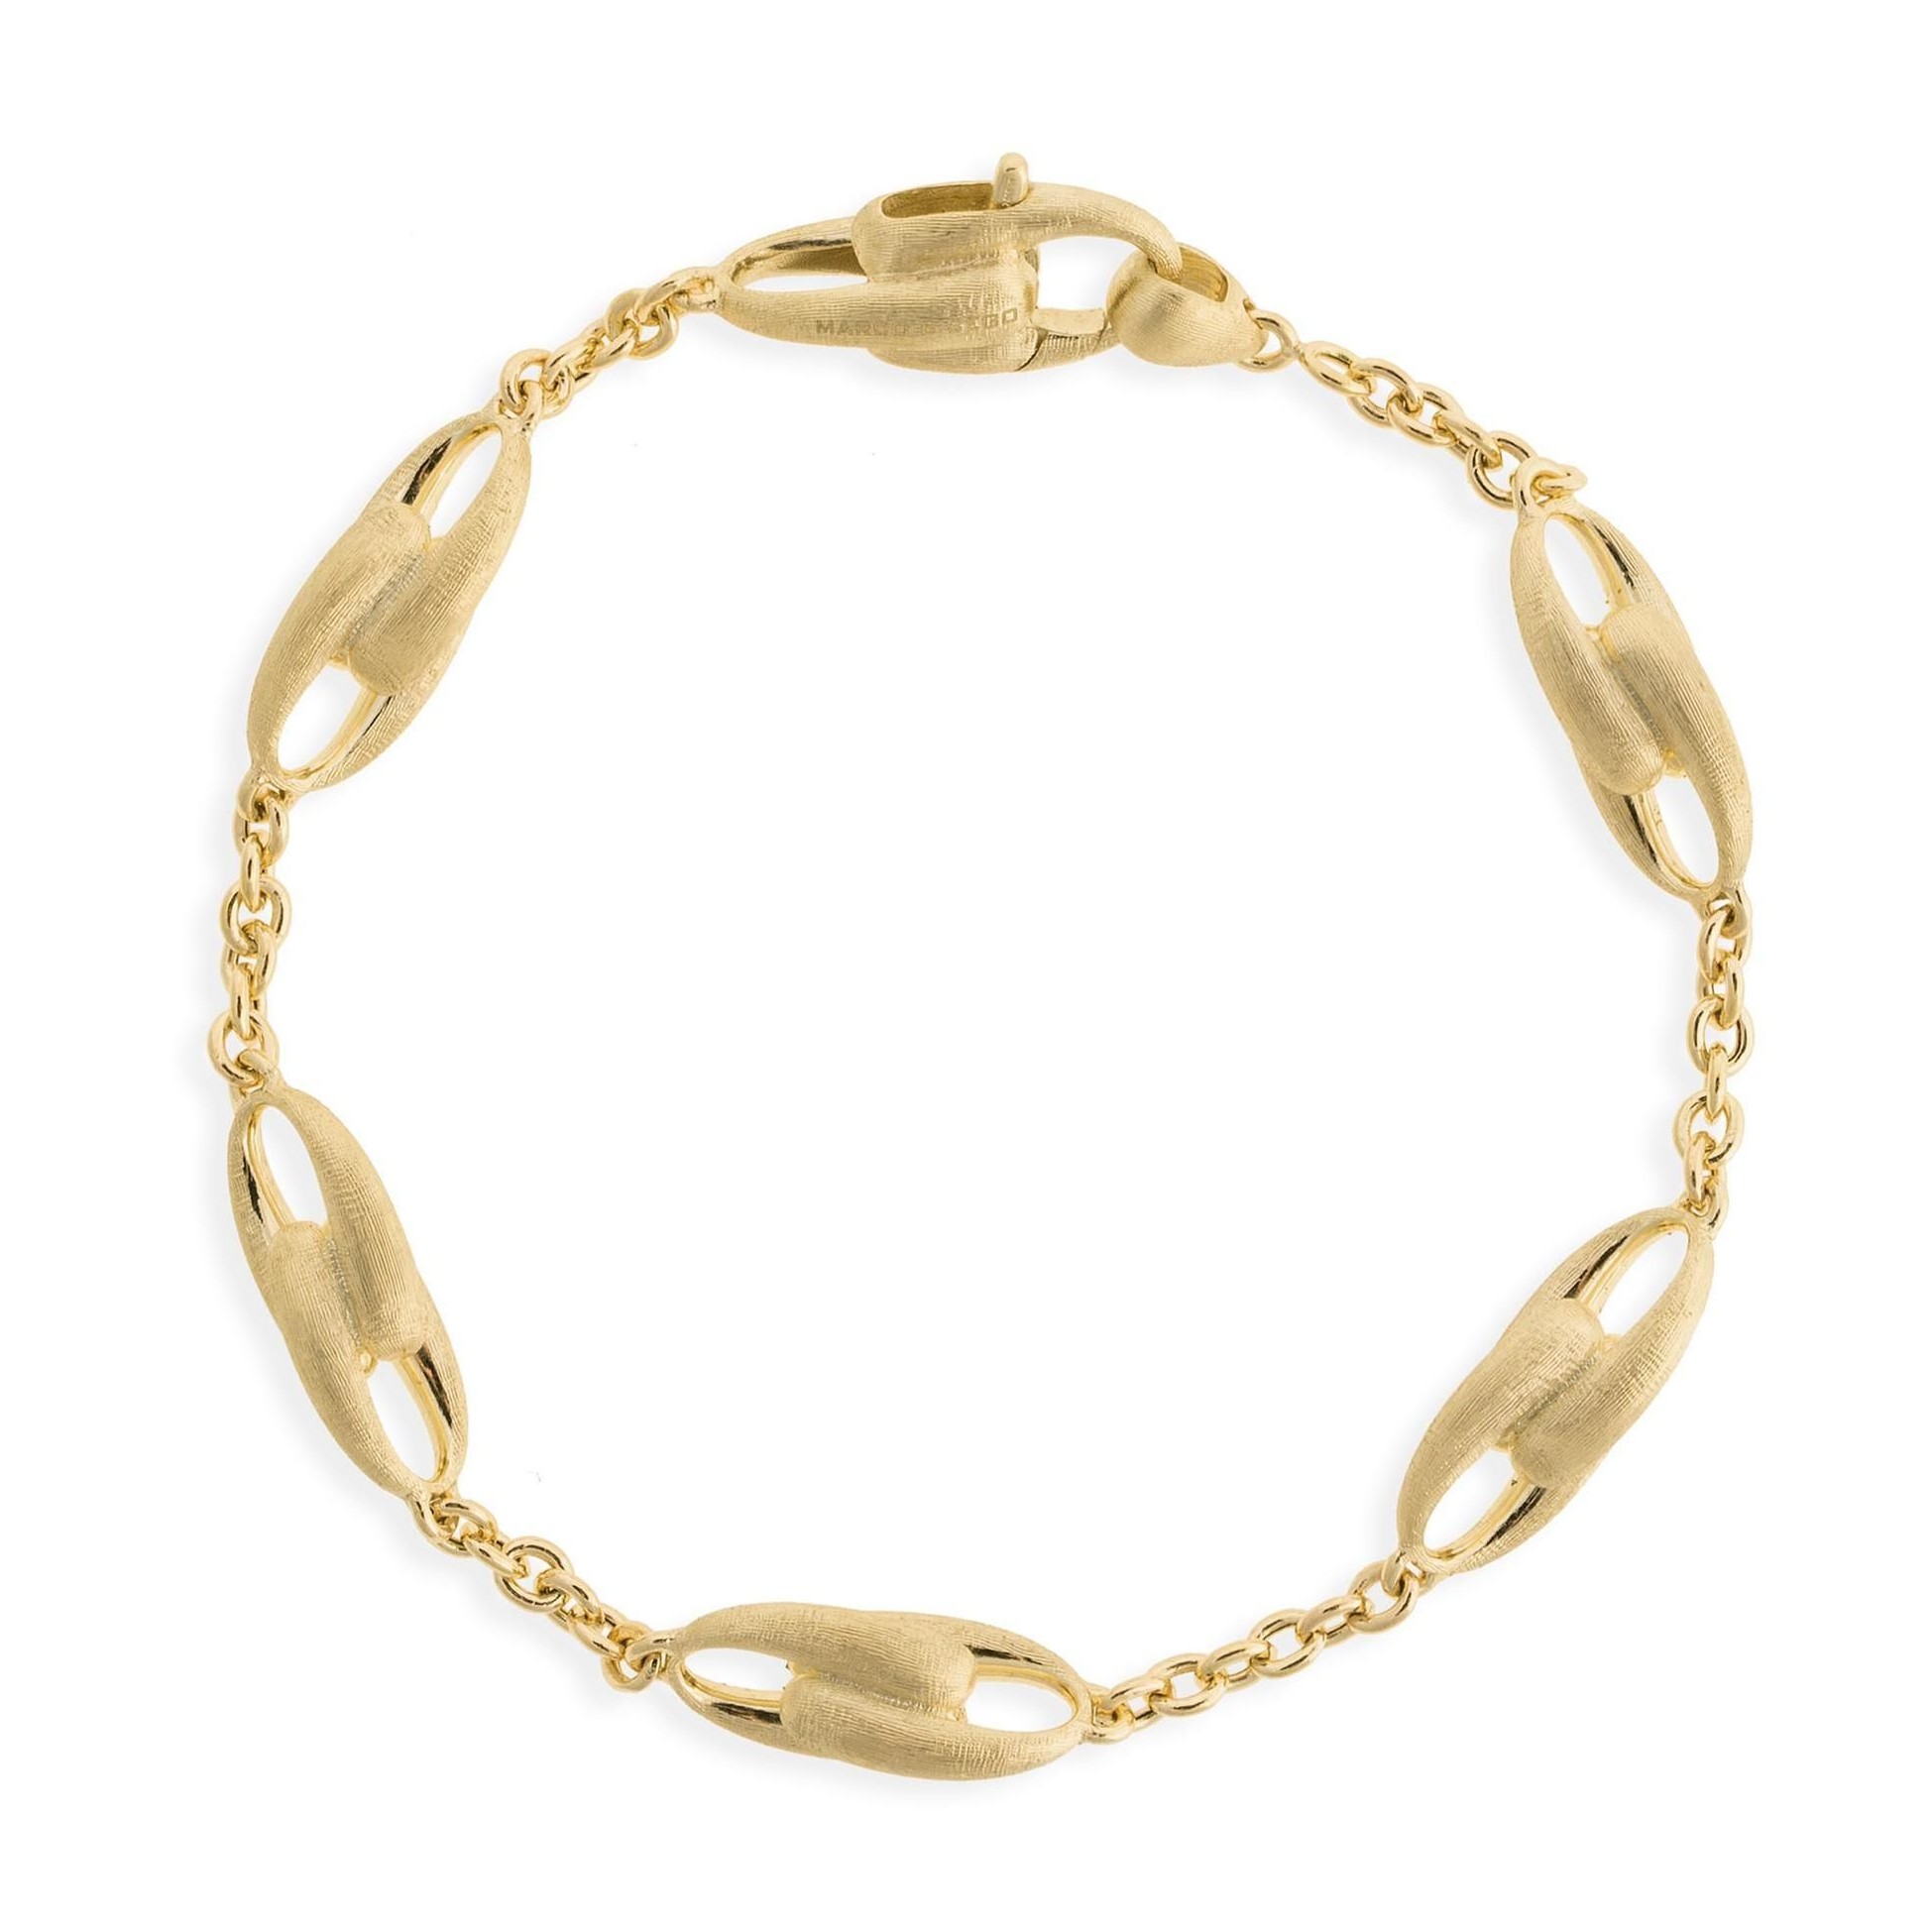 Marco Bicego 18K Yellow Gold Lucia Link & Chain Bracelet Size 7.75